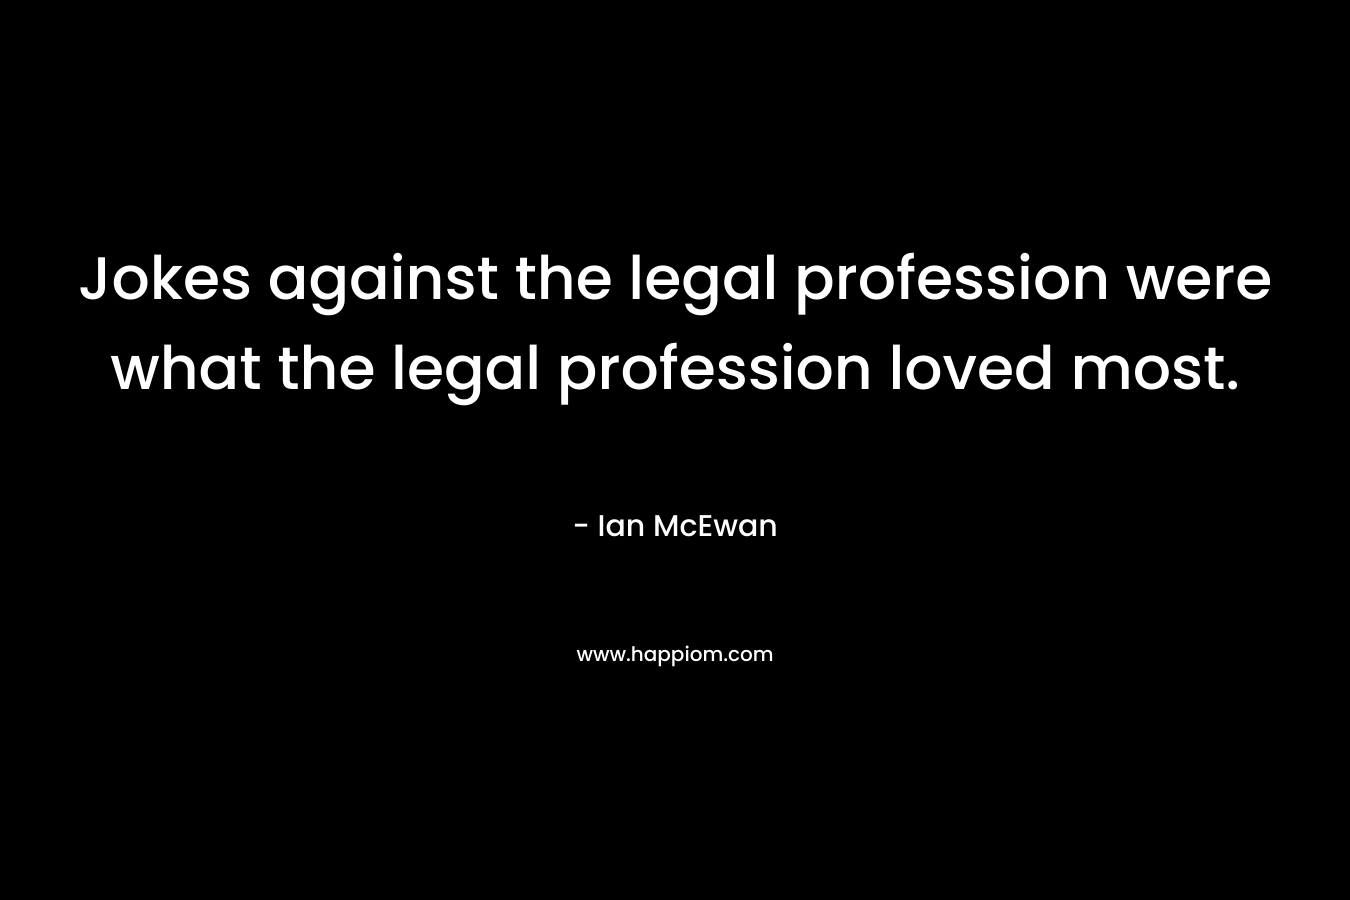 Jokes against the legal profession were what the legal profession loved most.